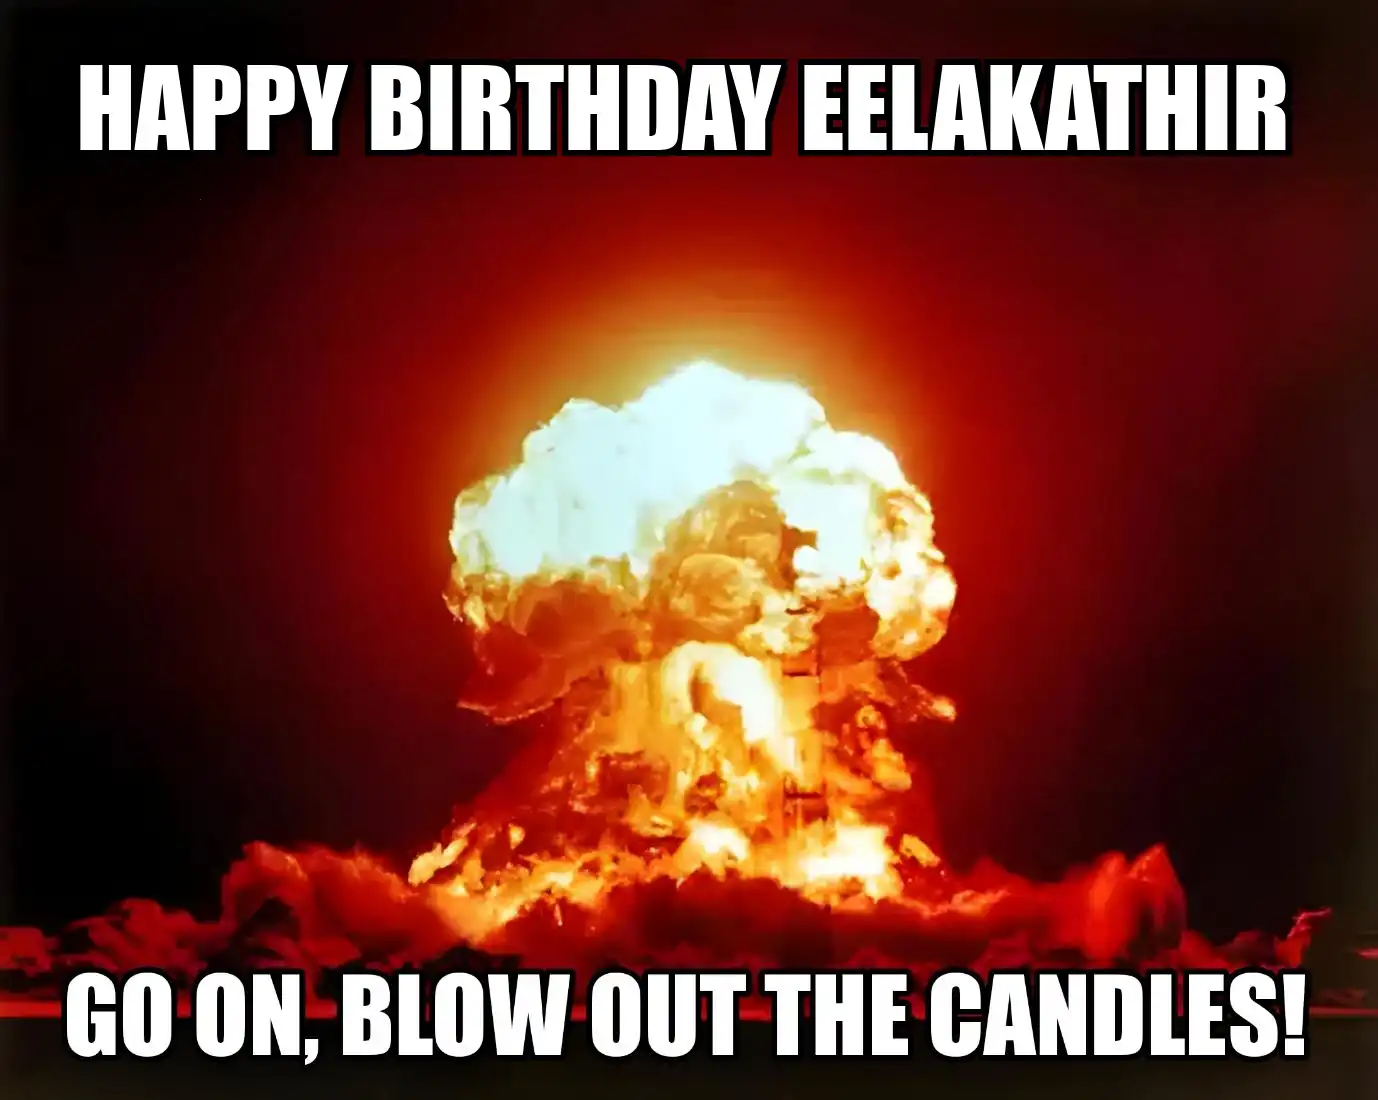 Happy Birthday Eelakathir Go On Blow Out The Candles Meme